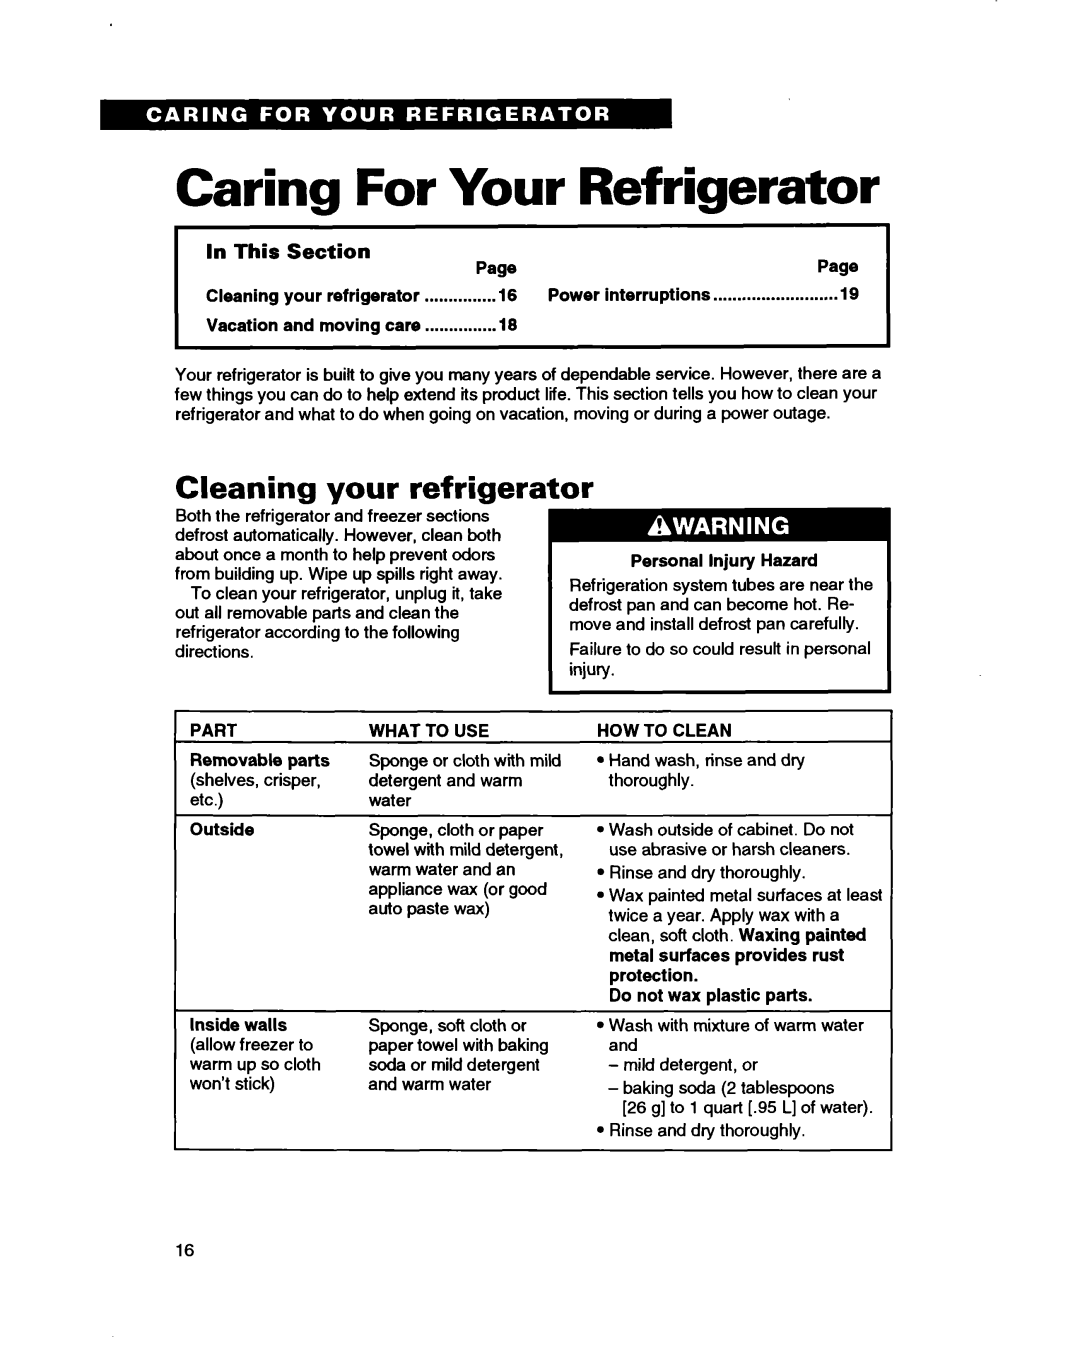 Whirlpool RTIGDK, RT16VK warranty Caring For Your Refrigerator, Cleaning your refrigerator 